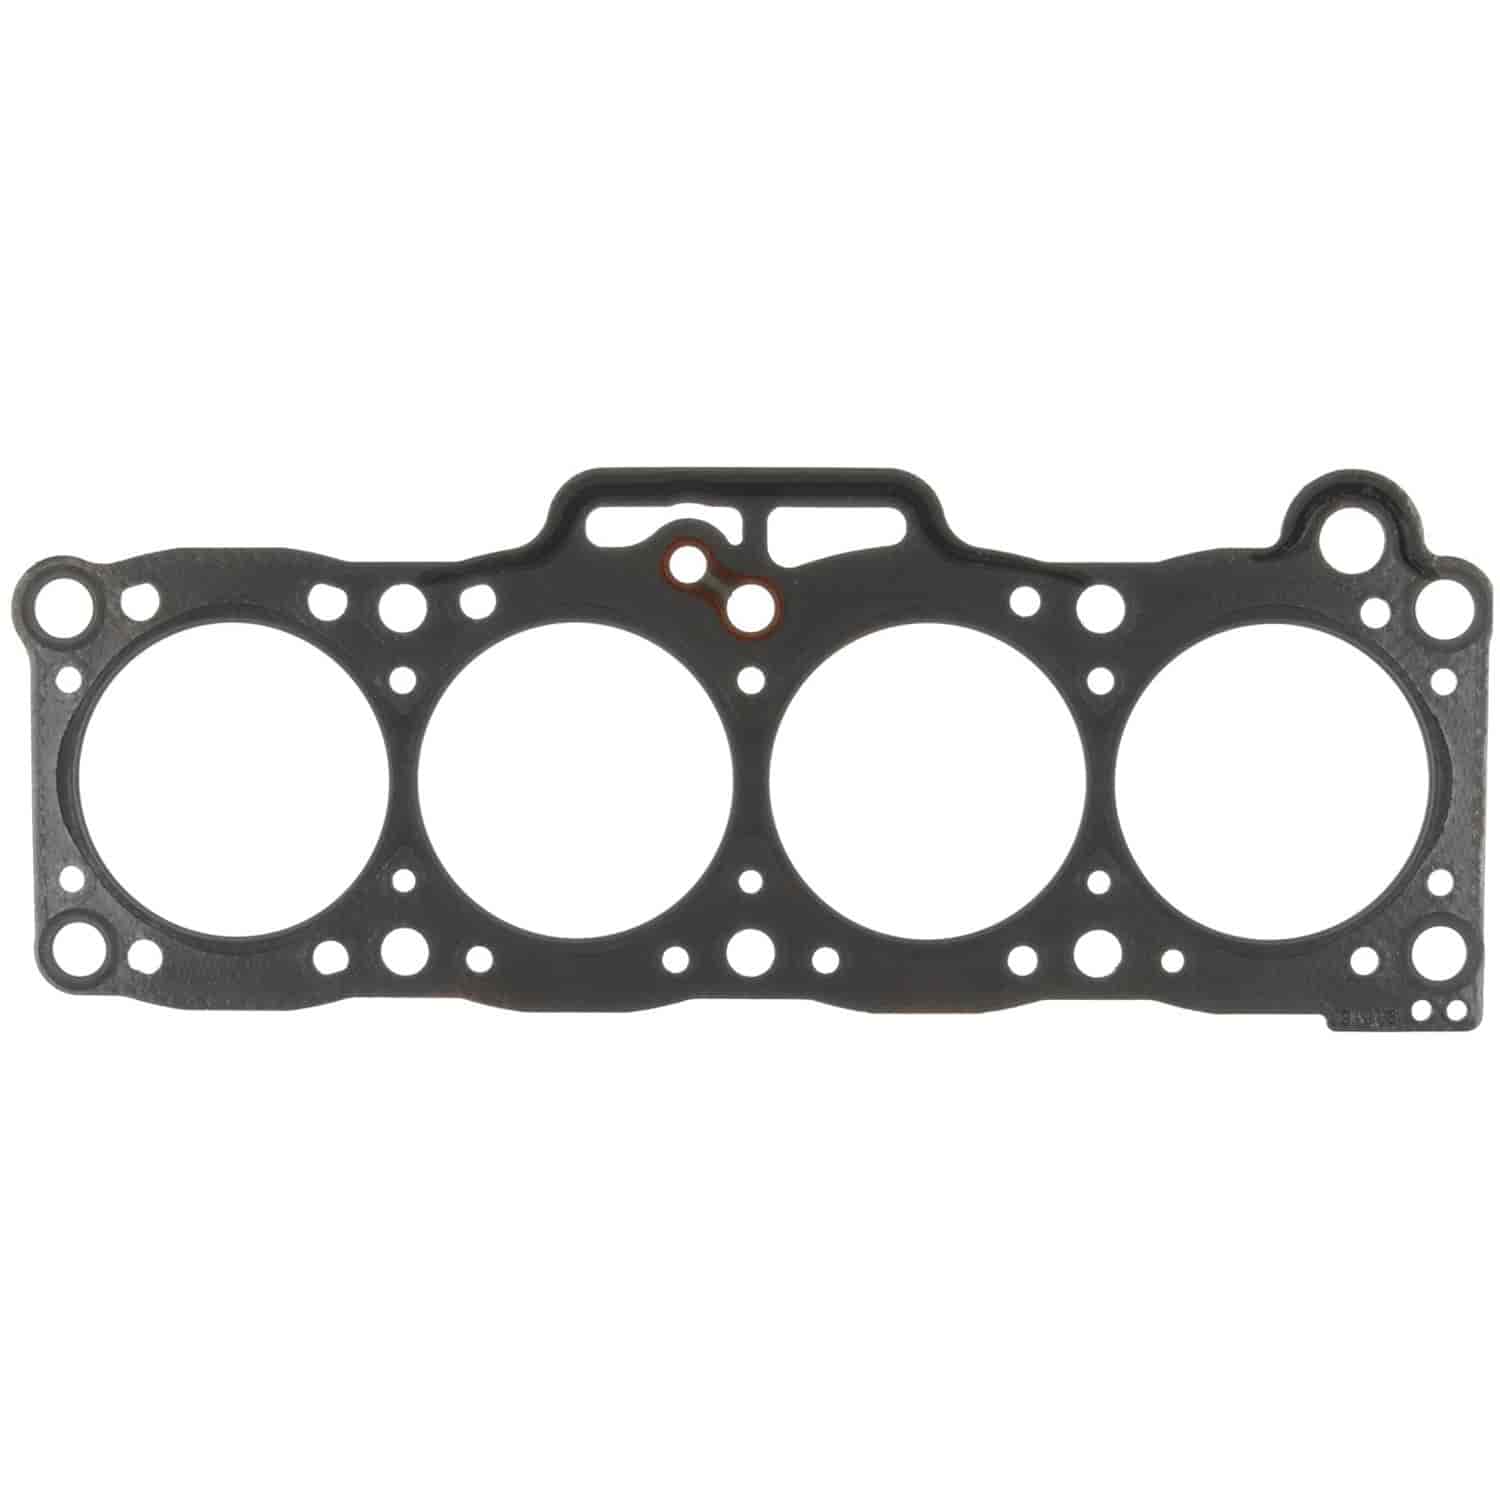 Cylinder Head Gasket Ford-Pass 134 2.2L Probe 89-92